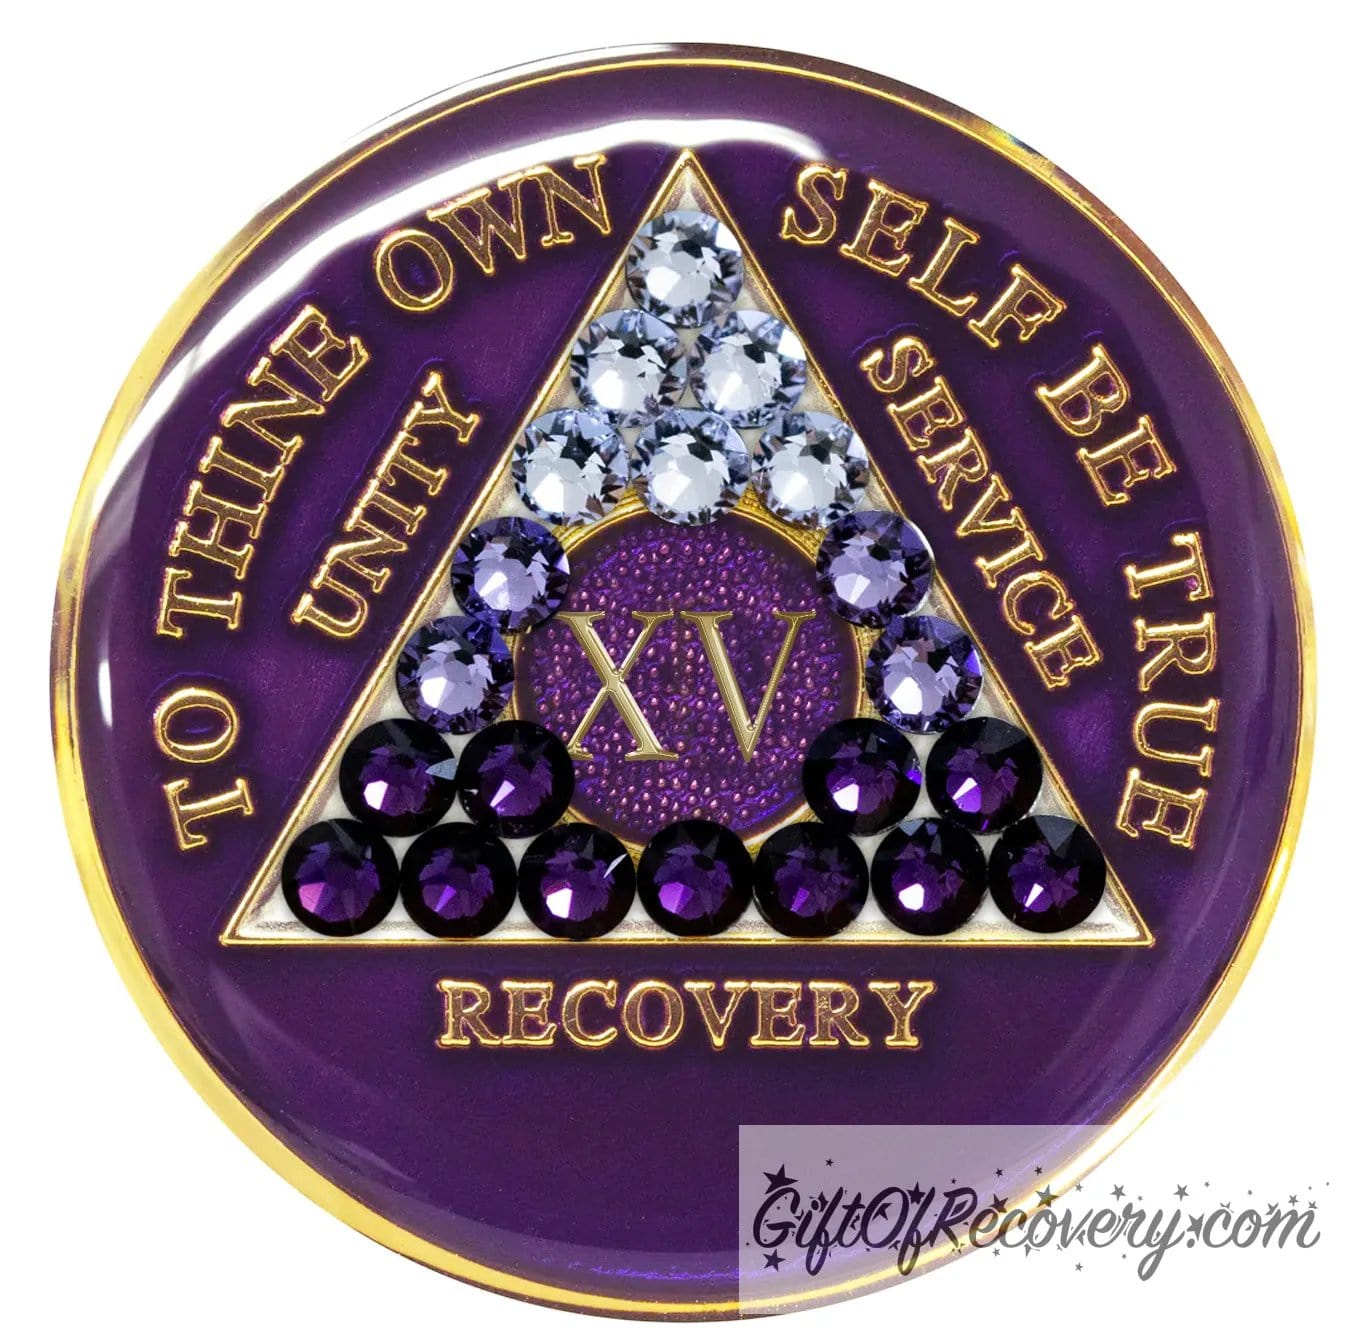 15 year Amethyst purple AA medallion with 21 genuine crystals ranging from light to dark for symbolism of transition, the triangle, circle, roman numeral, unity, recovery, service, and to thine own self be true, are embossed with 14k gold, while the middle of the circle with the roman numeral is purple glitter, the recovery medallion is sealed with resin for a glossy finish. 